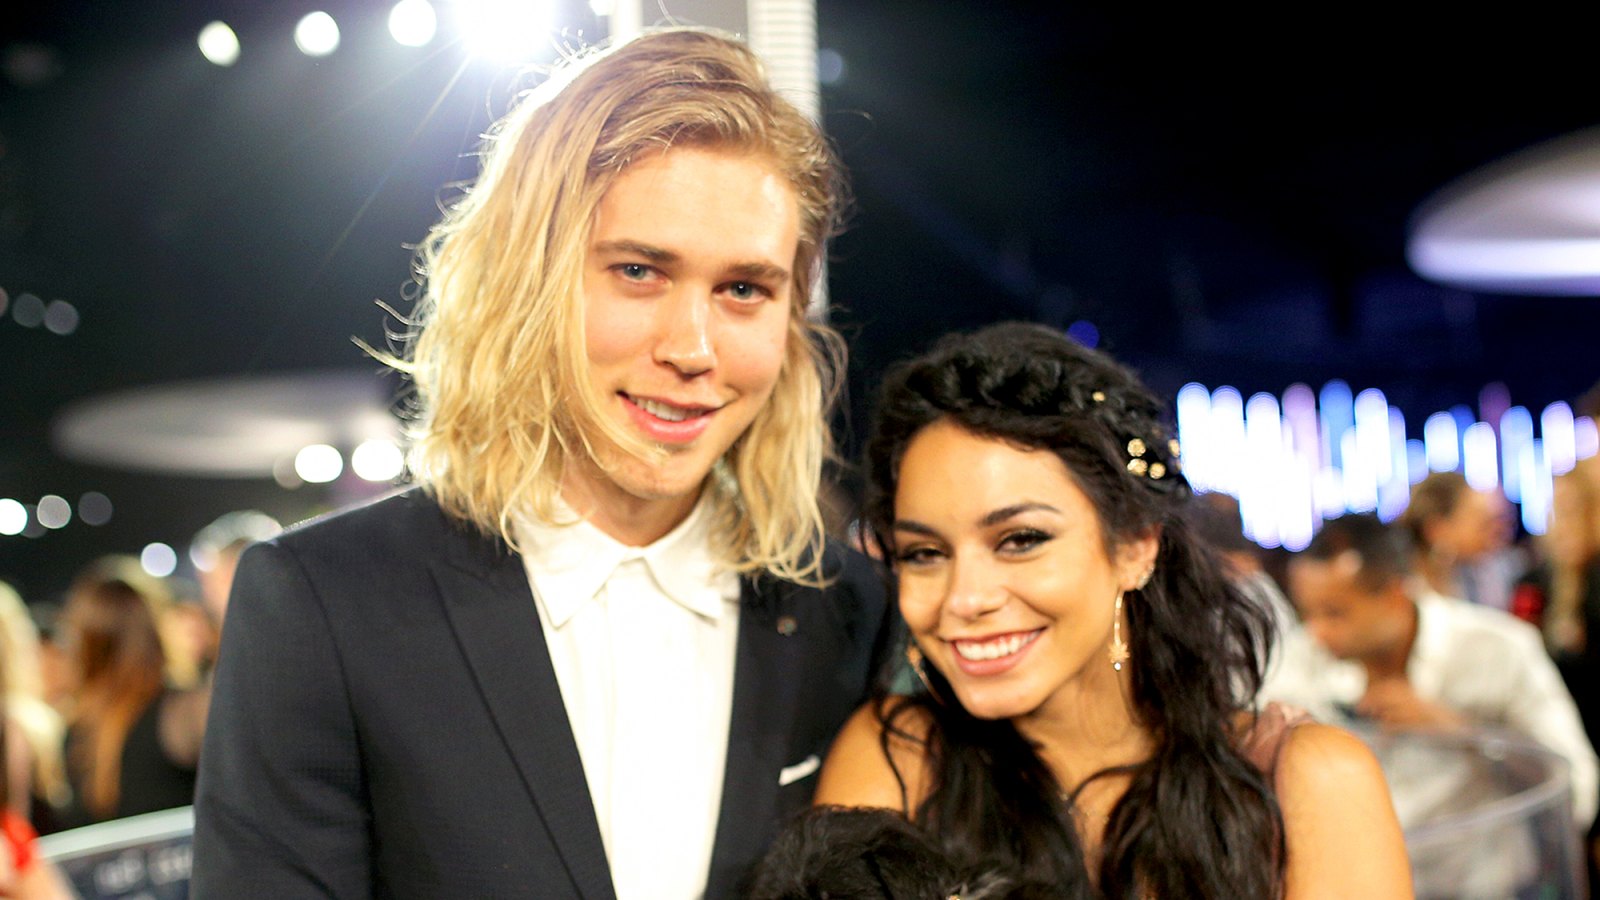 Austin Butler and Vanessa Hudgens during the 2015 MTV Video Music Awards at Microsoft Theater in Los Angeles, California.